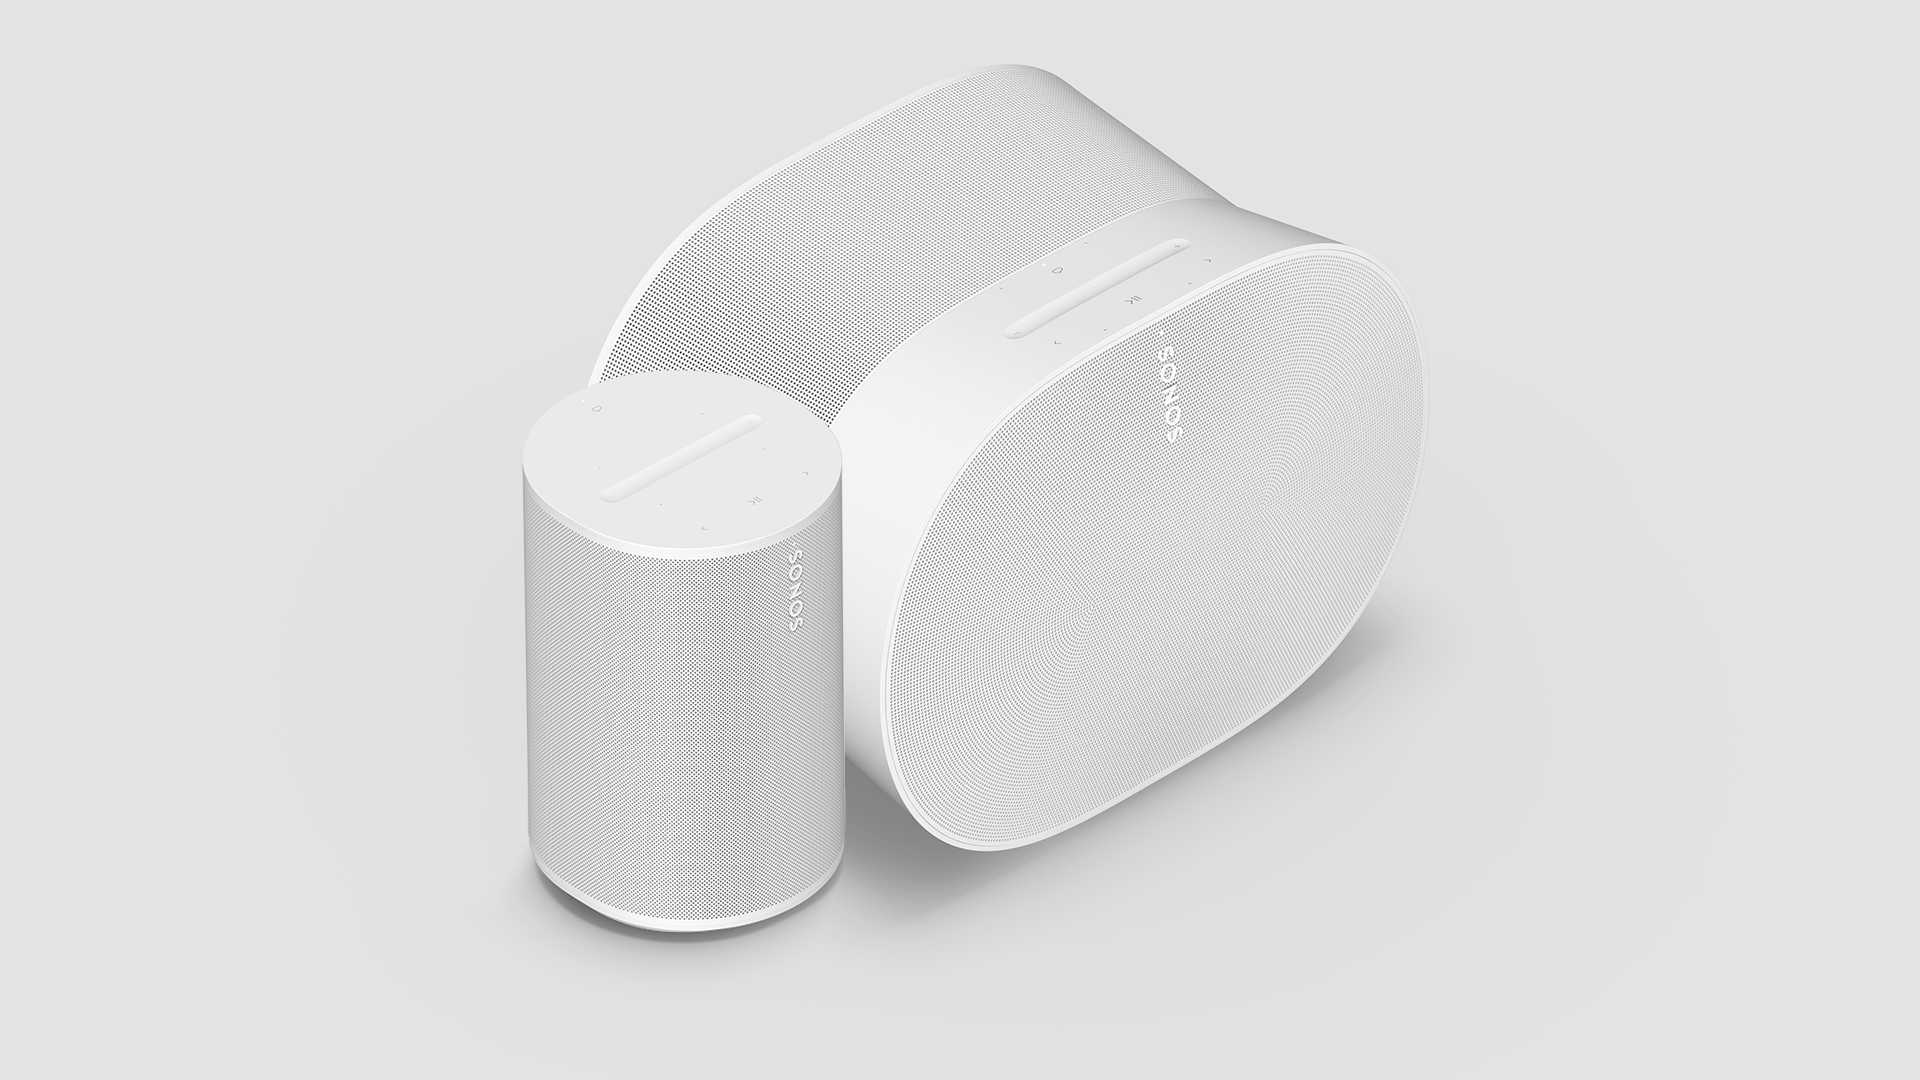 Sonos Era 100 & 300 Dolby Atmos speakers: what we know